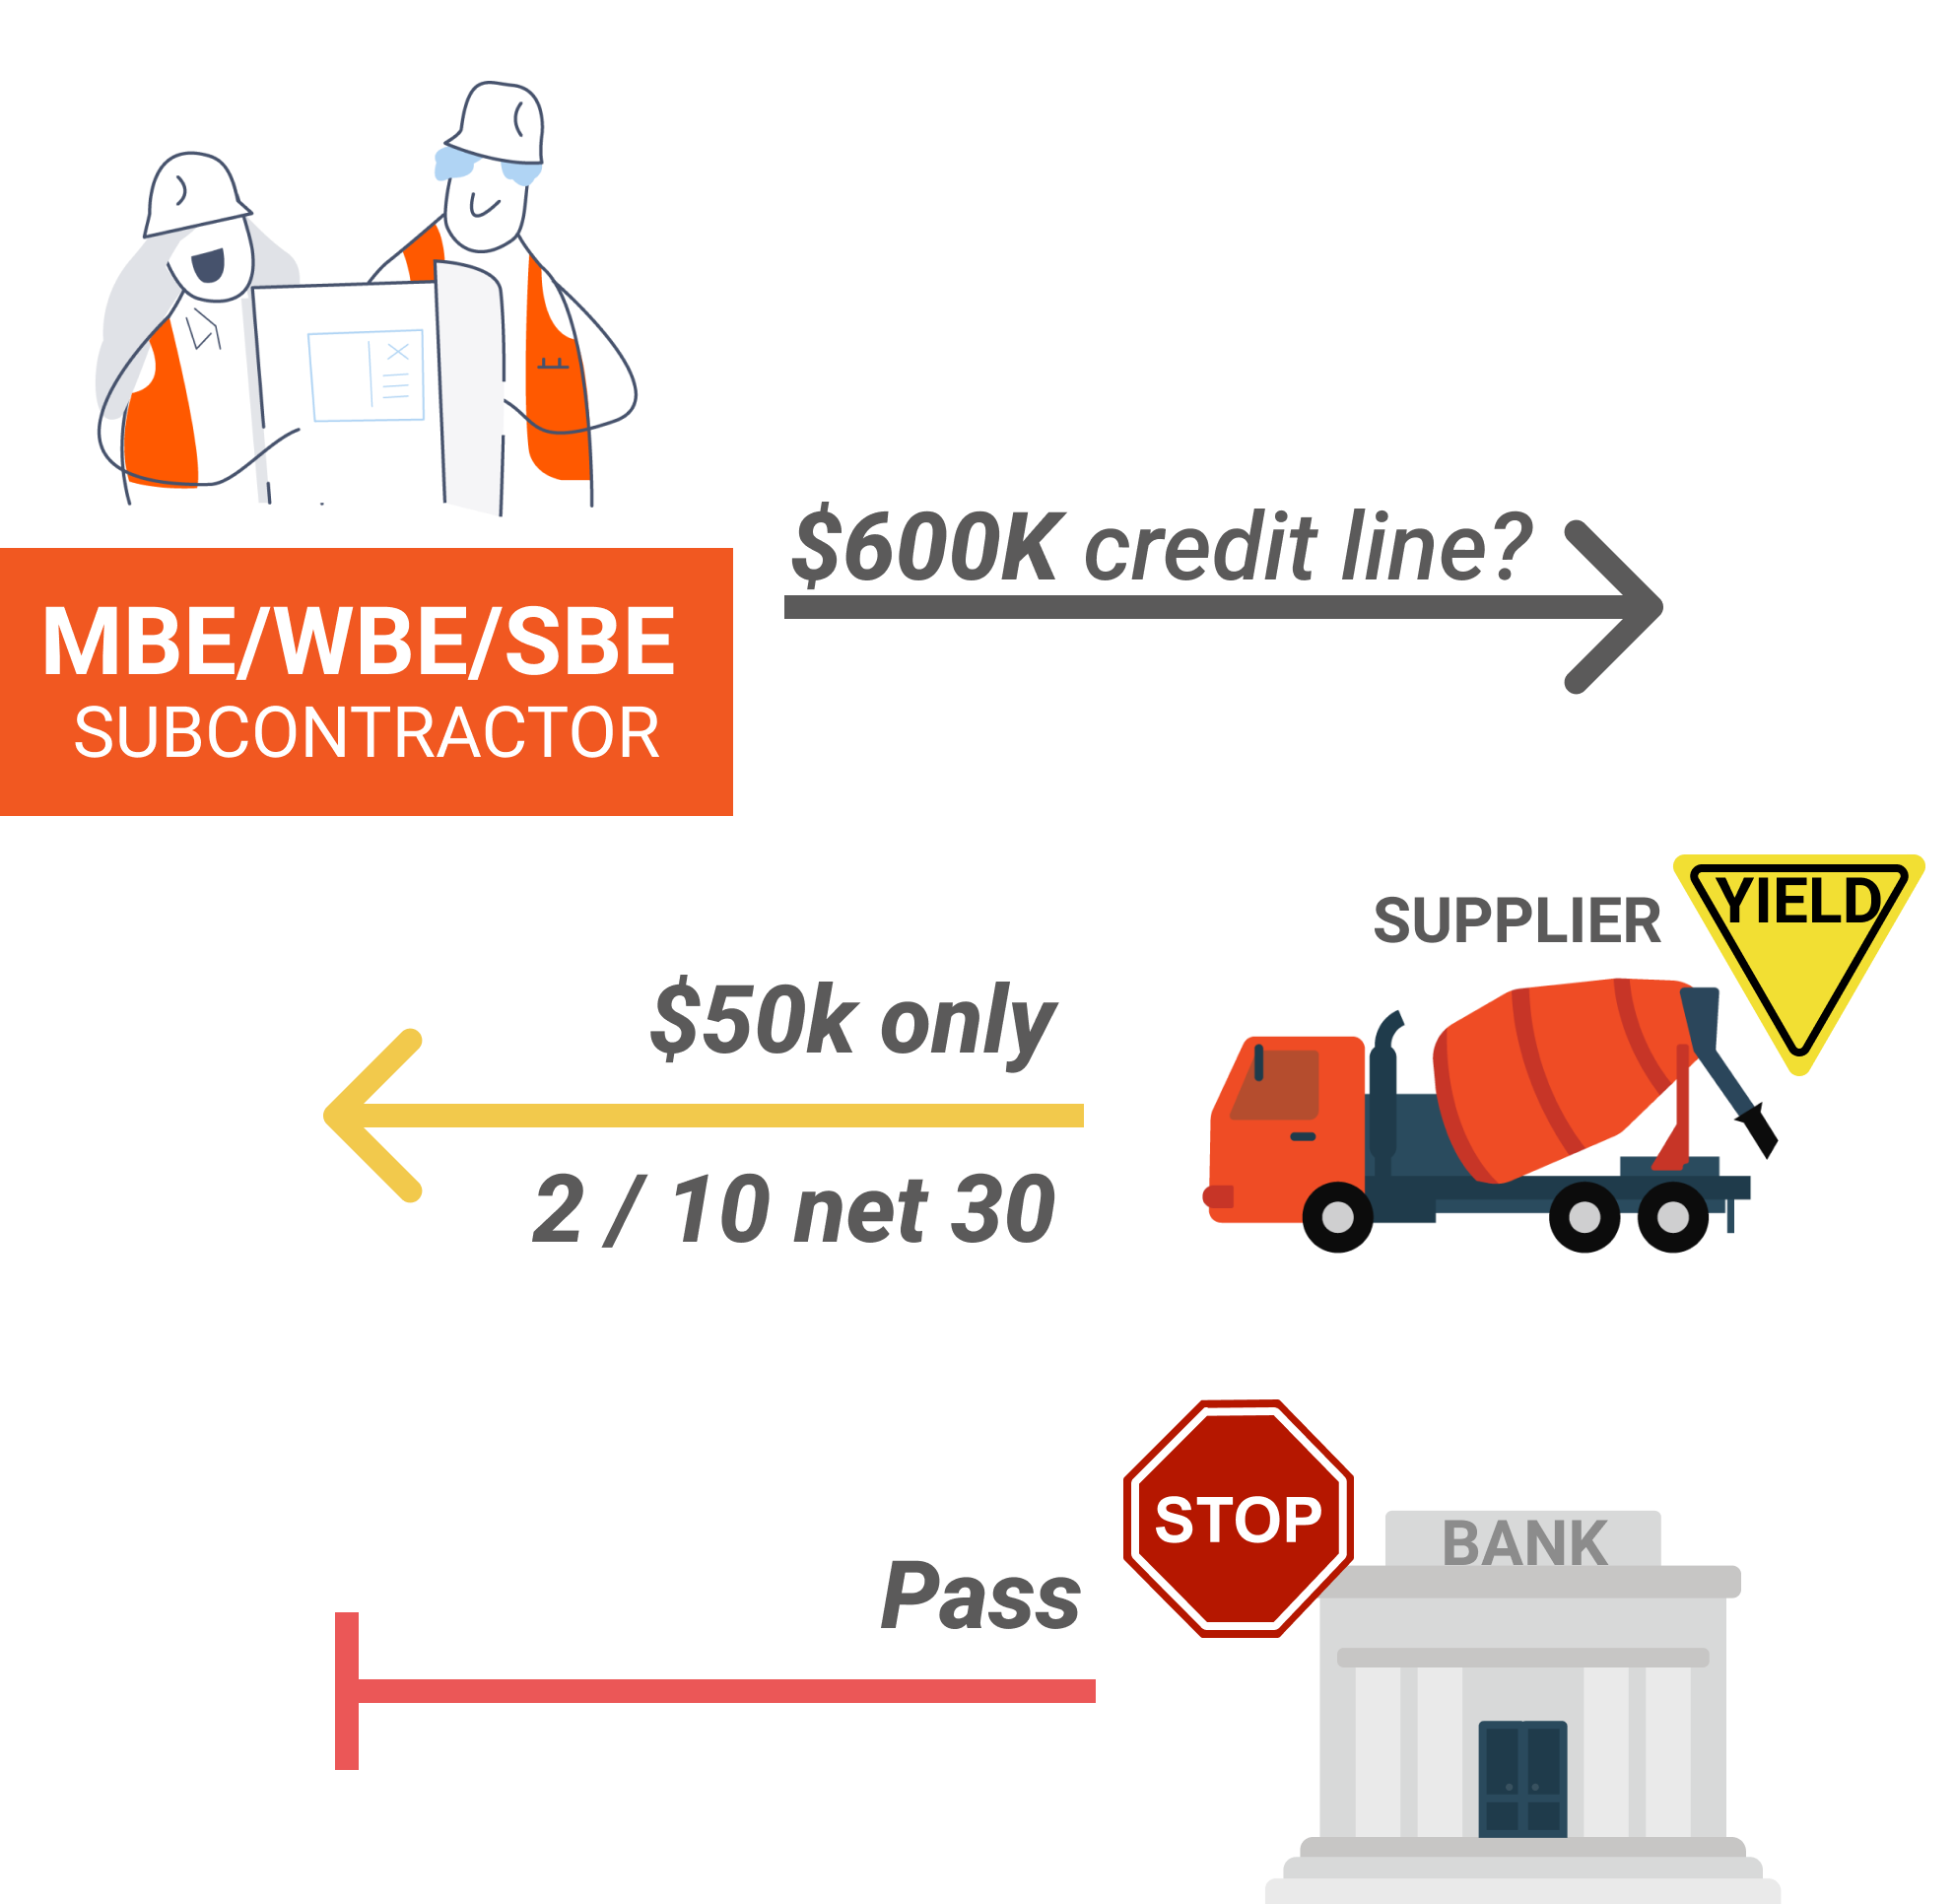 SBE MBE and DBE have limited access to trade credit and are unbanked